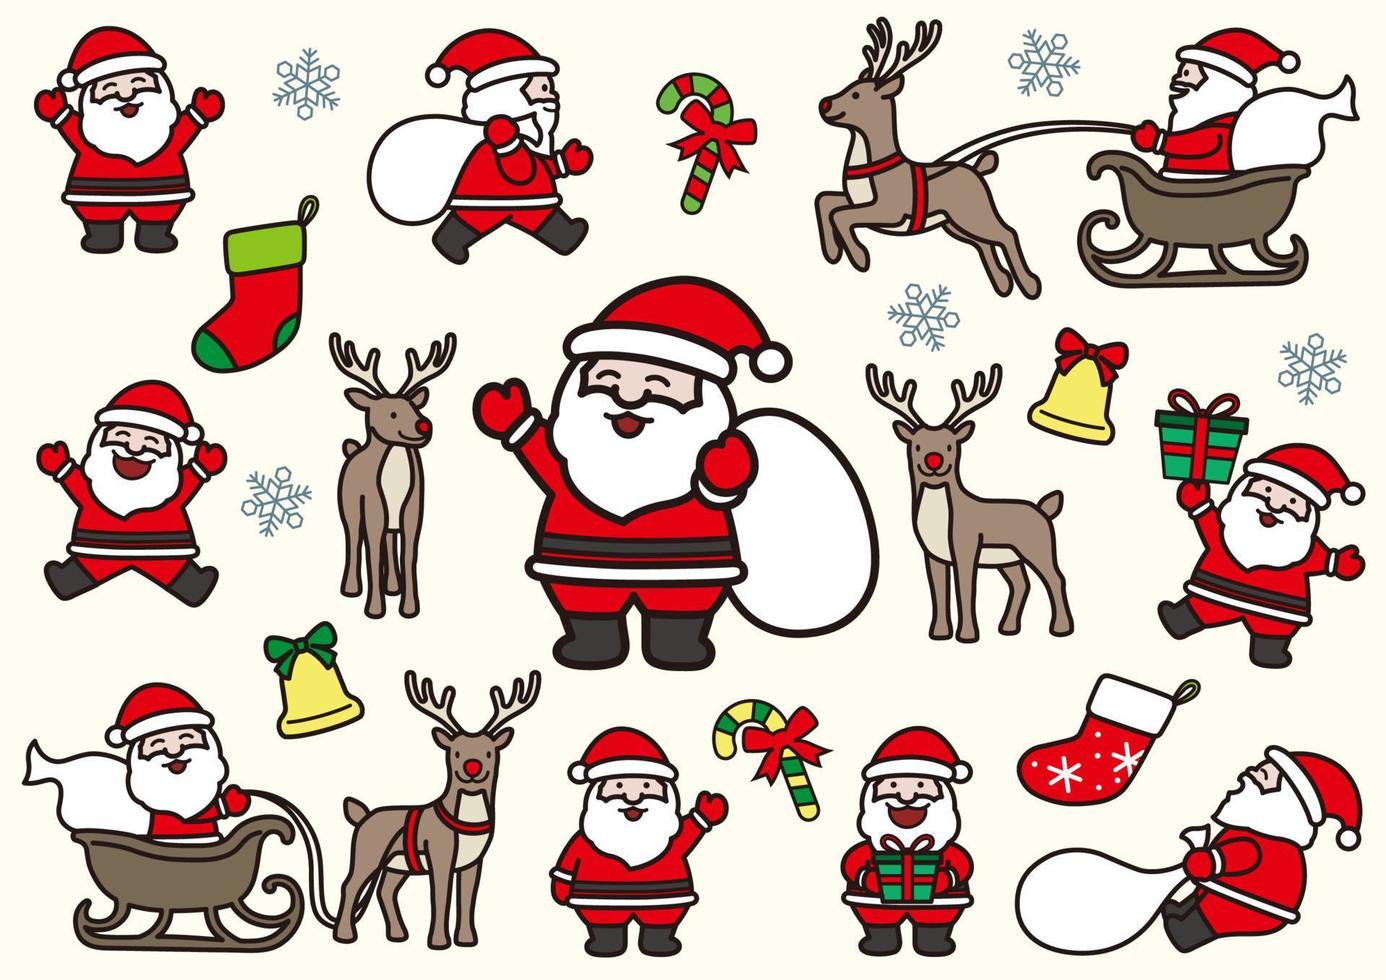 Funny Cartoonish Santa Claus And Reindeer Set In Dynamic Poses, Vector Illustration Isolated On A White Background.